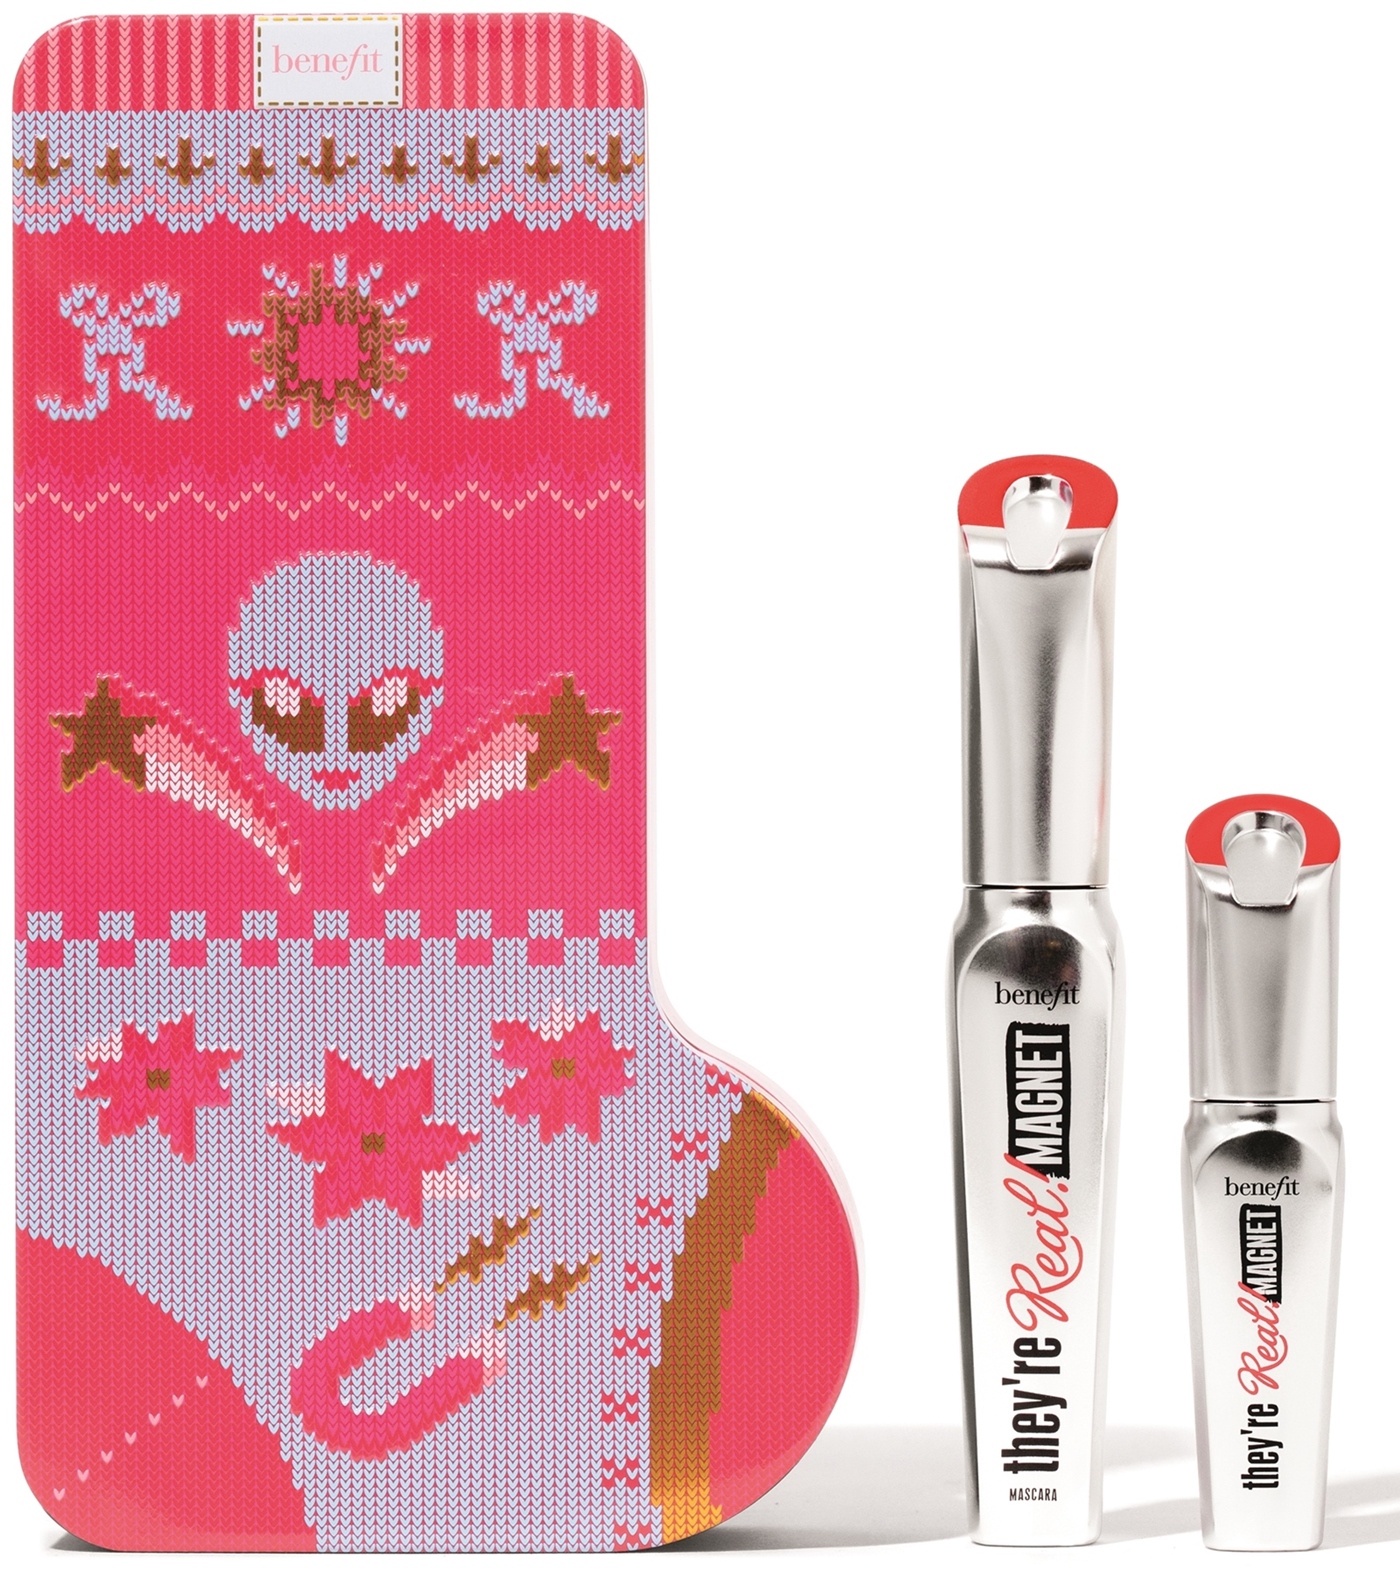 Benefit Cosmetics Lashes all the Way